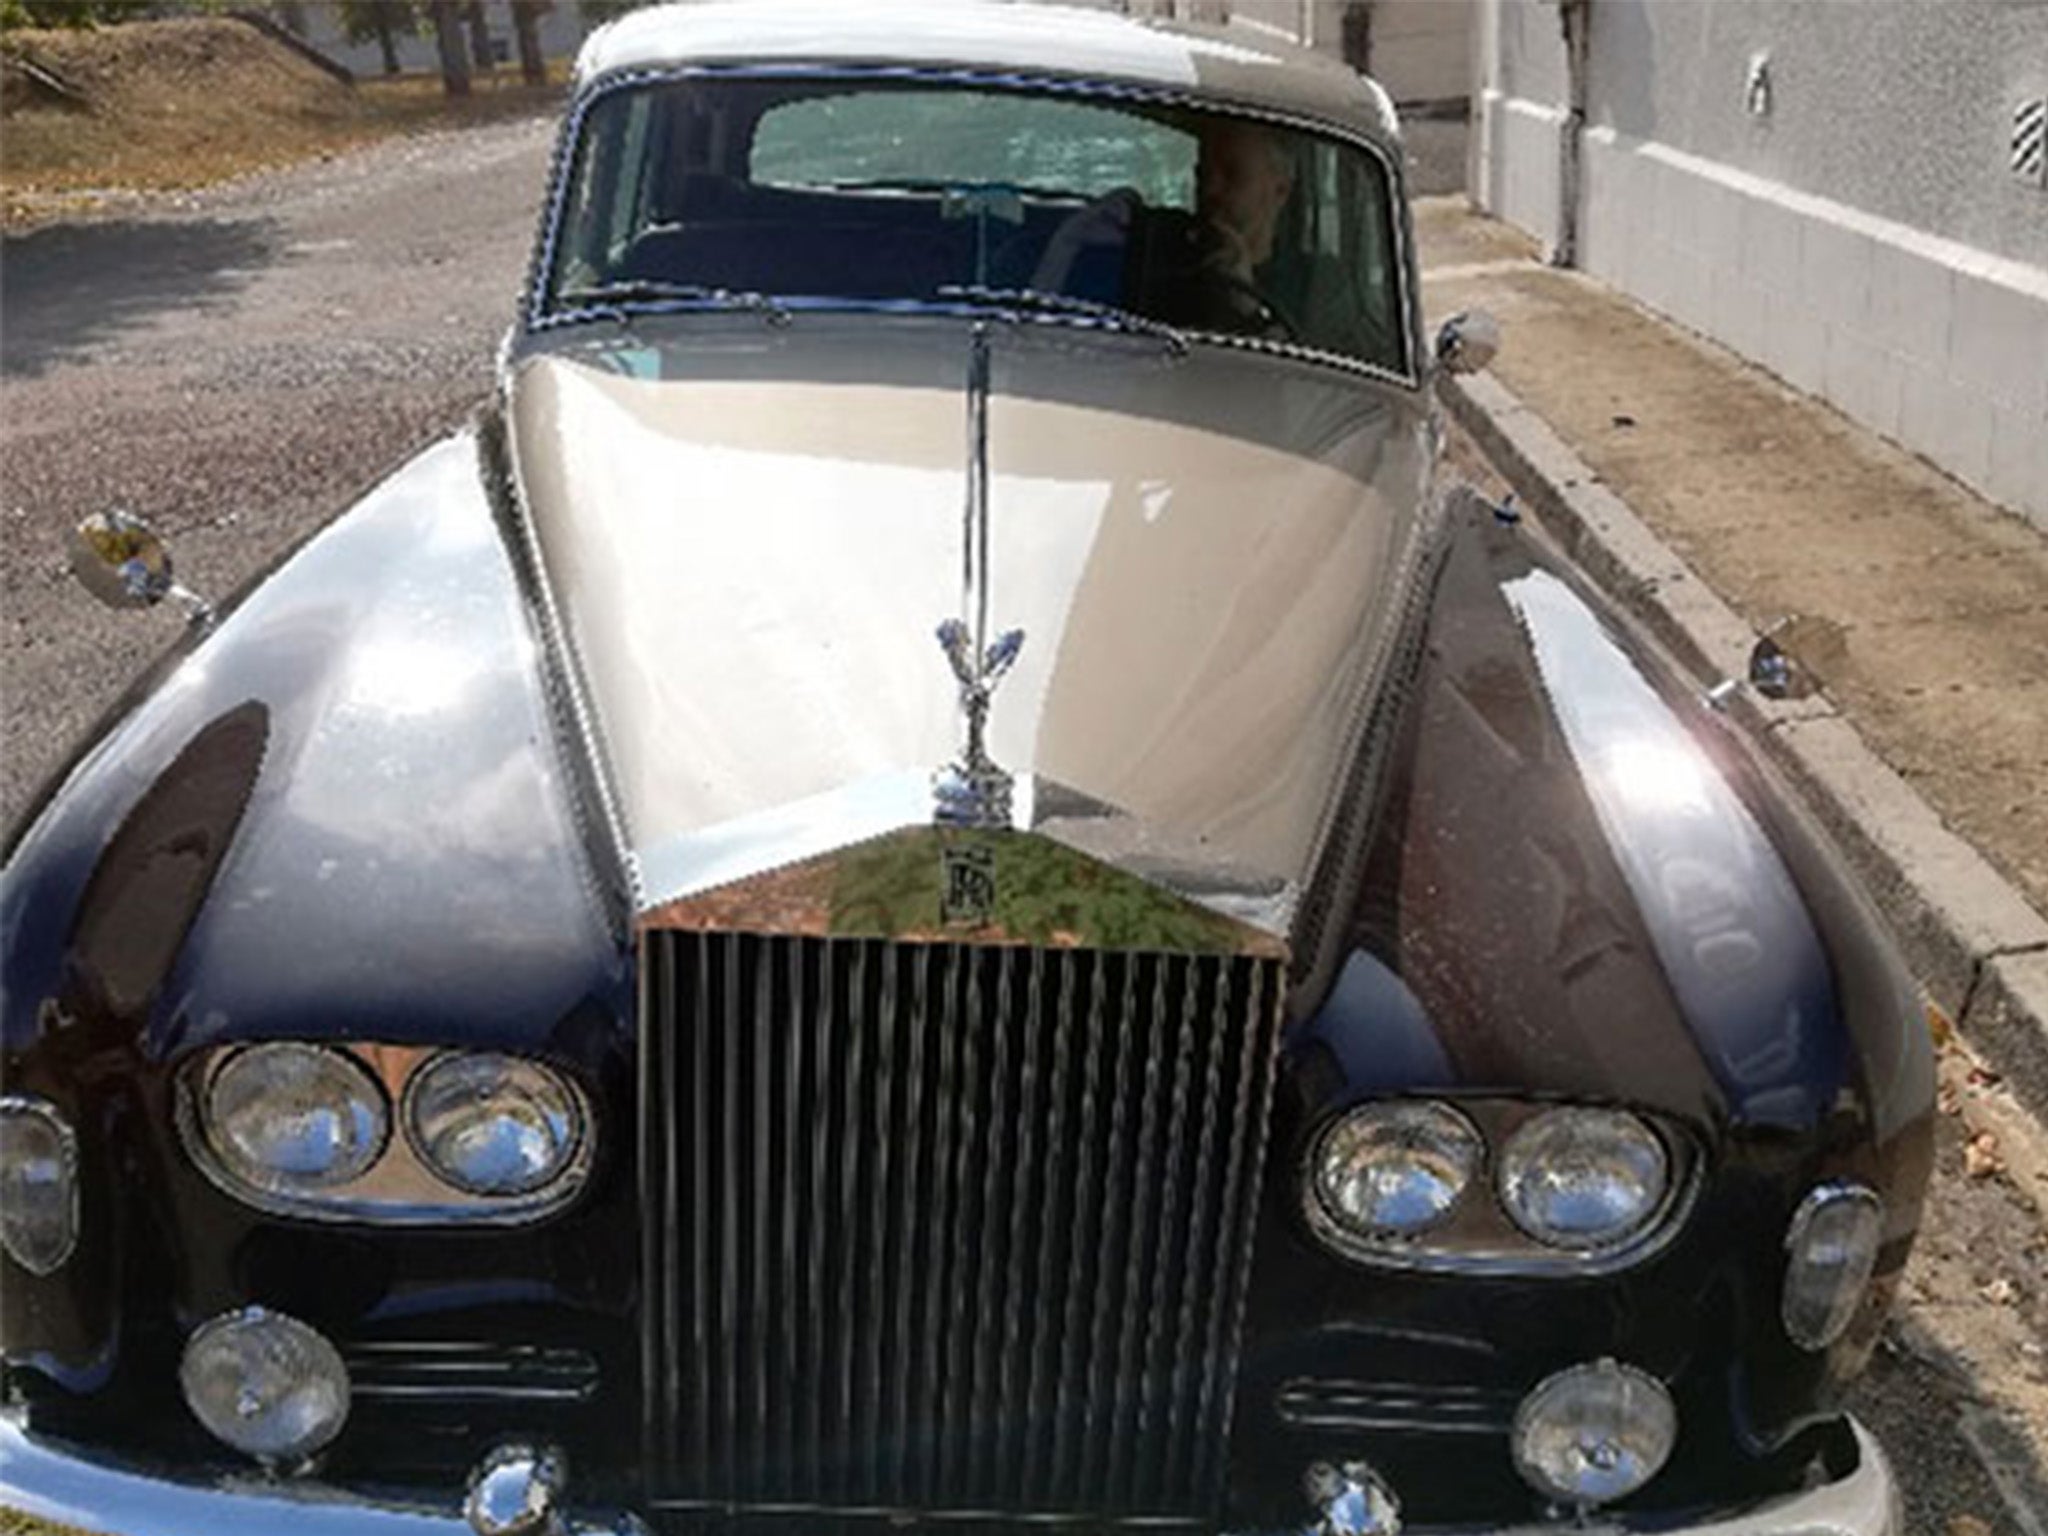 The vintage Rolls Royce Phantom was seized by Europol during the arrest